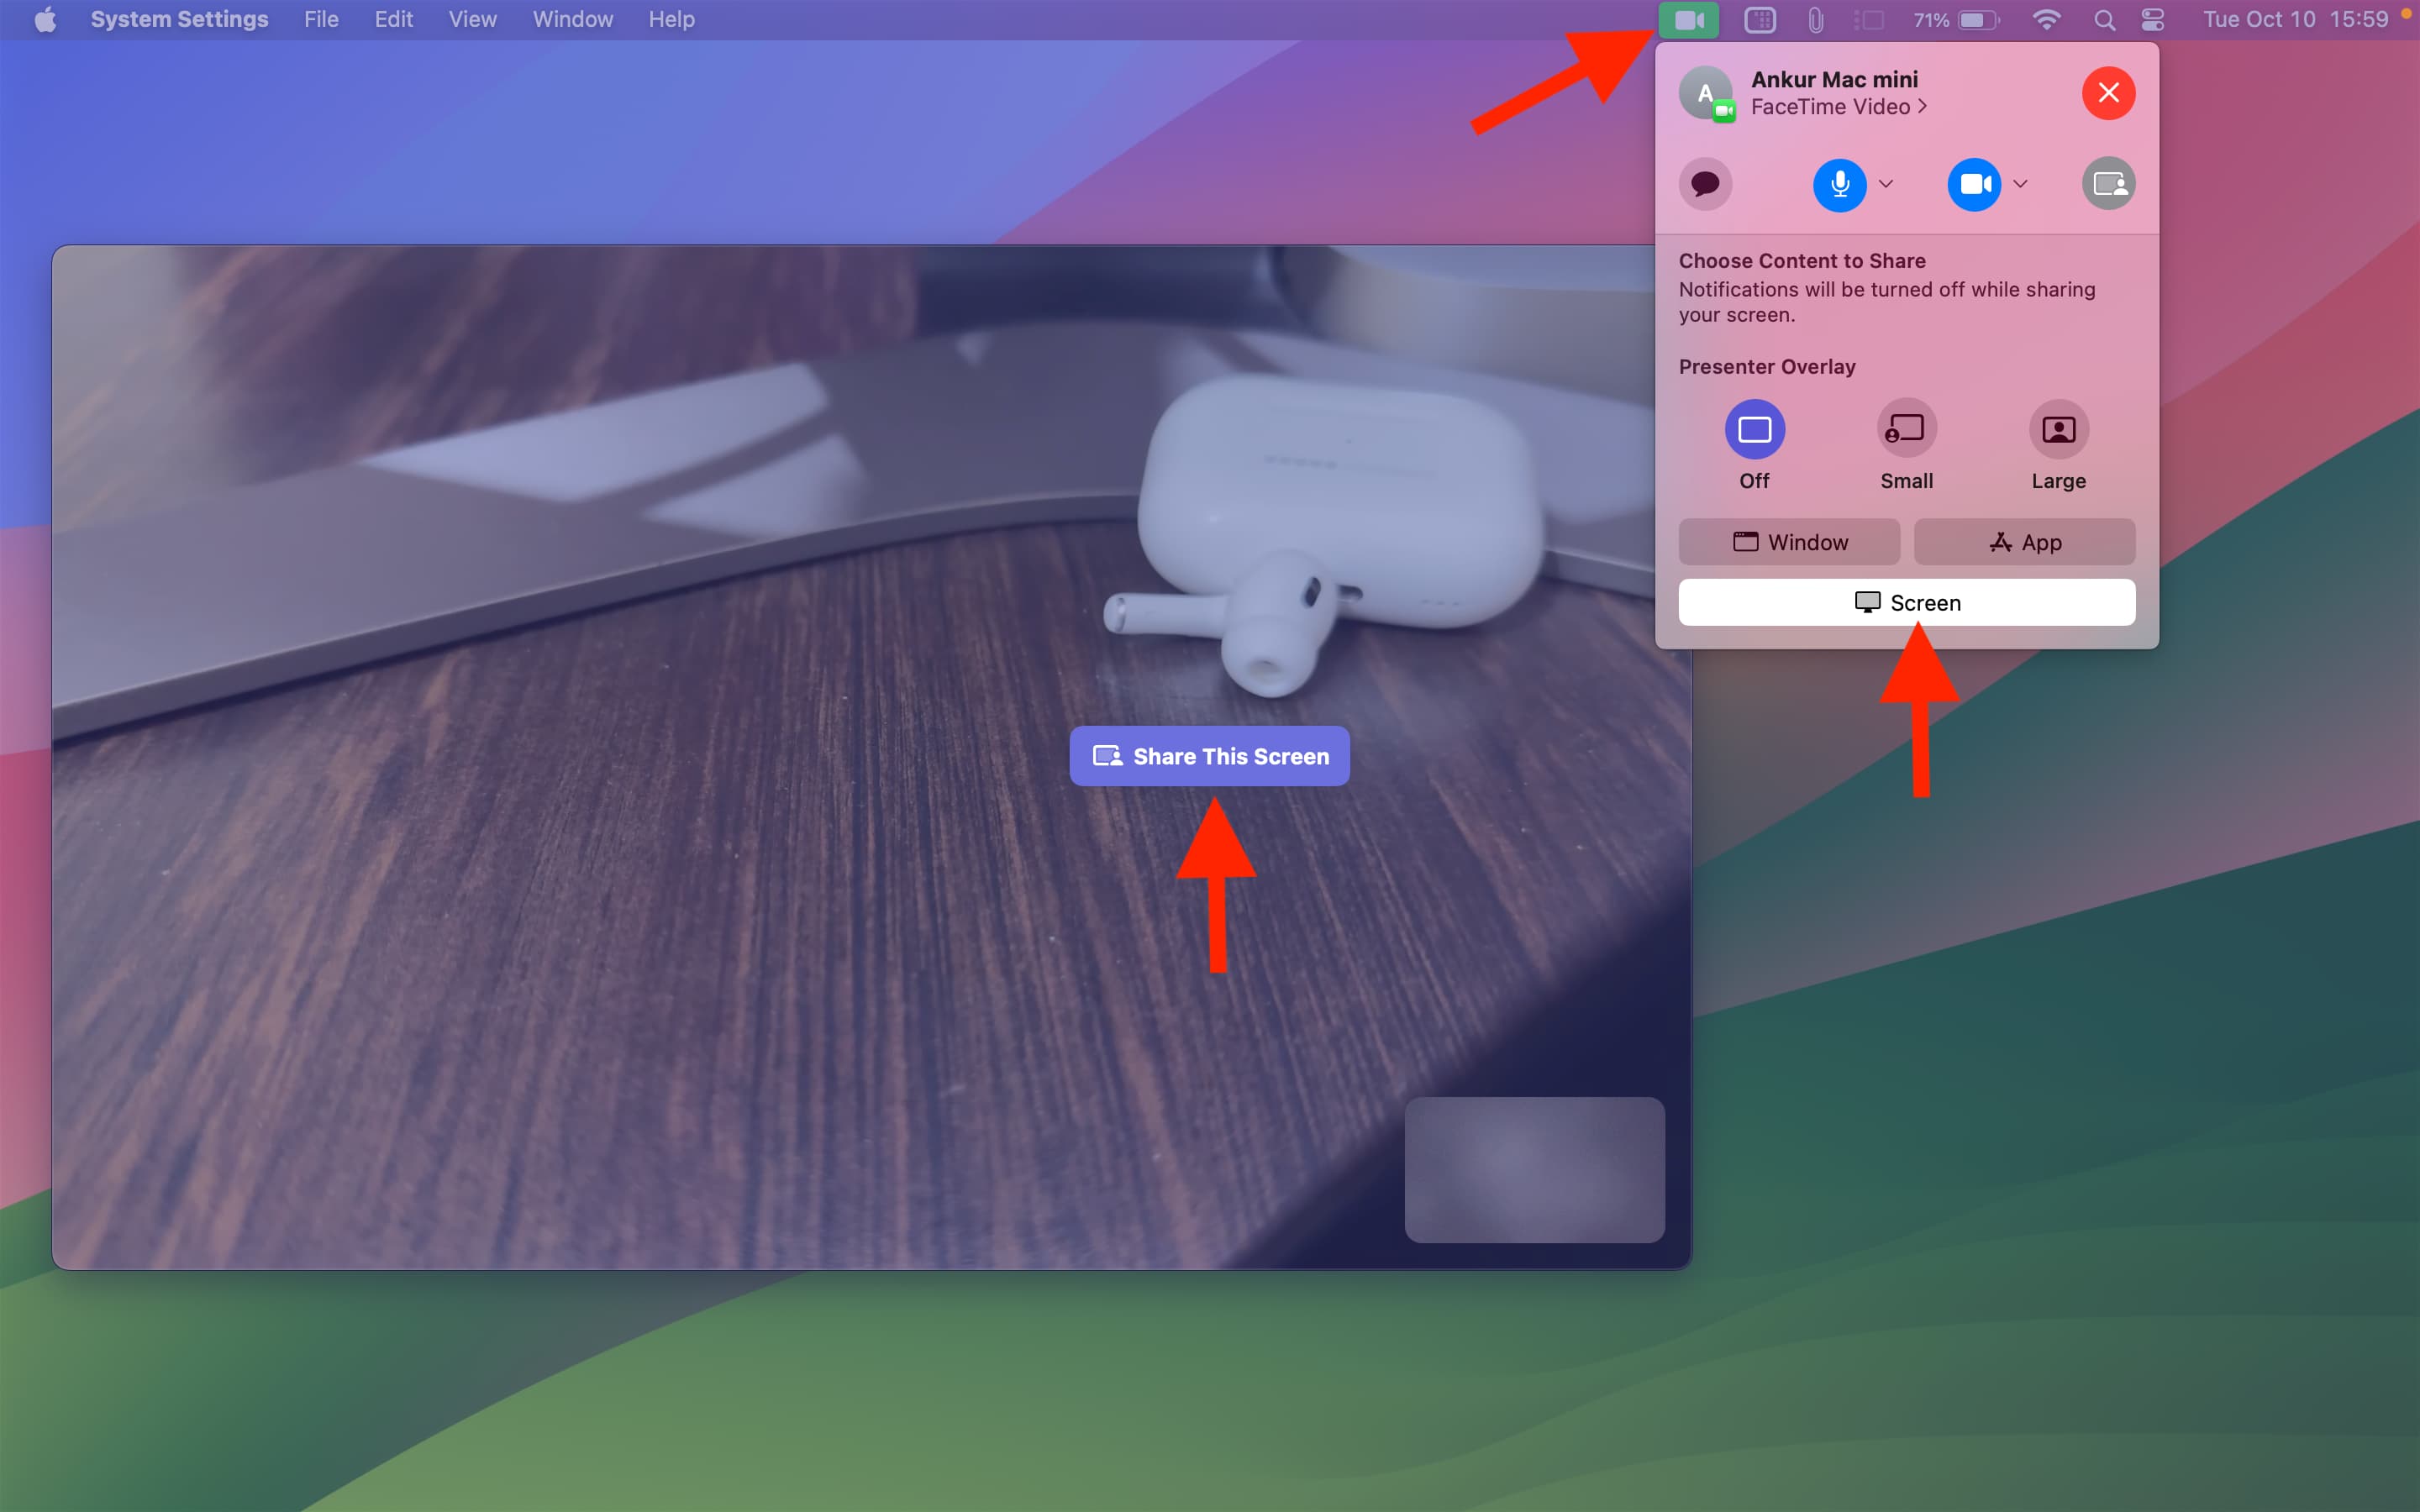 Share your full screen during FaceTime call on Mac